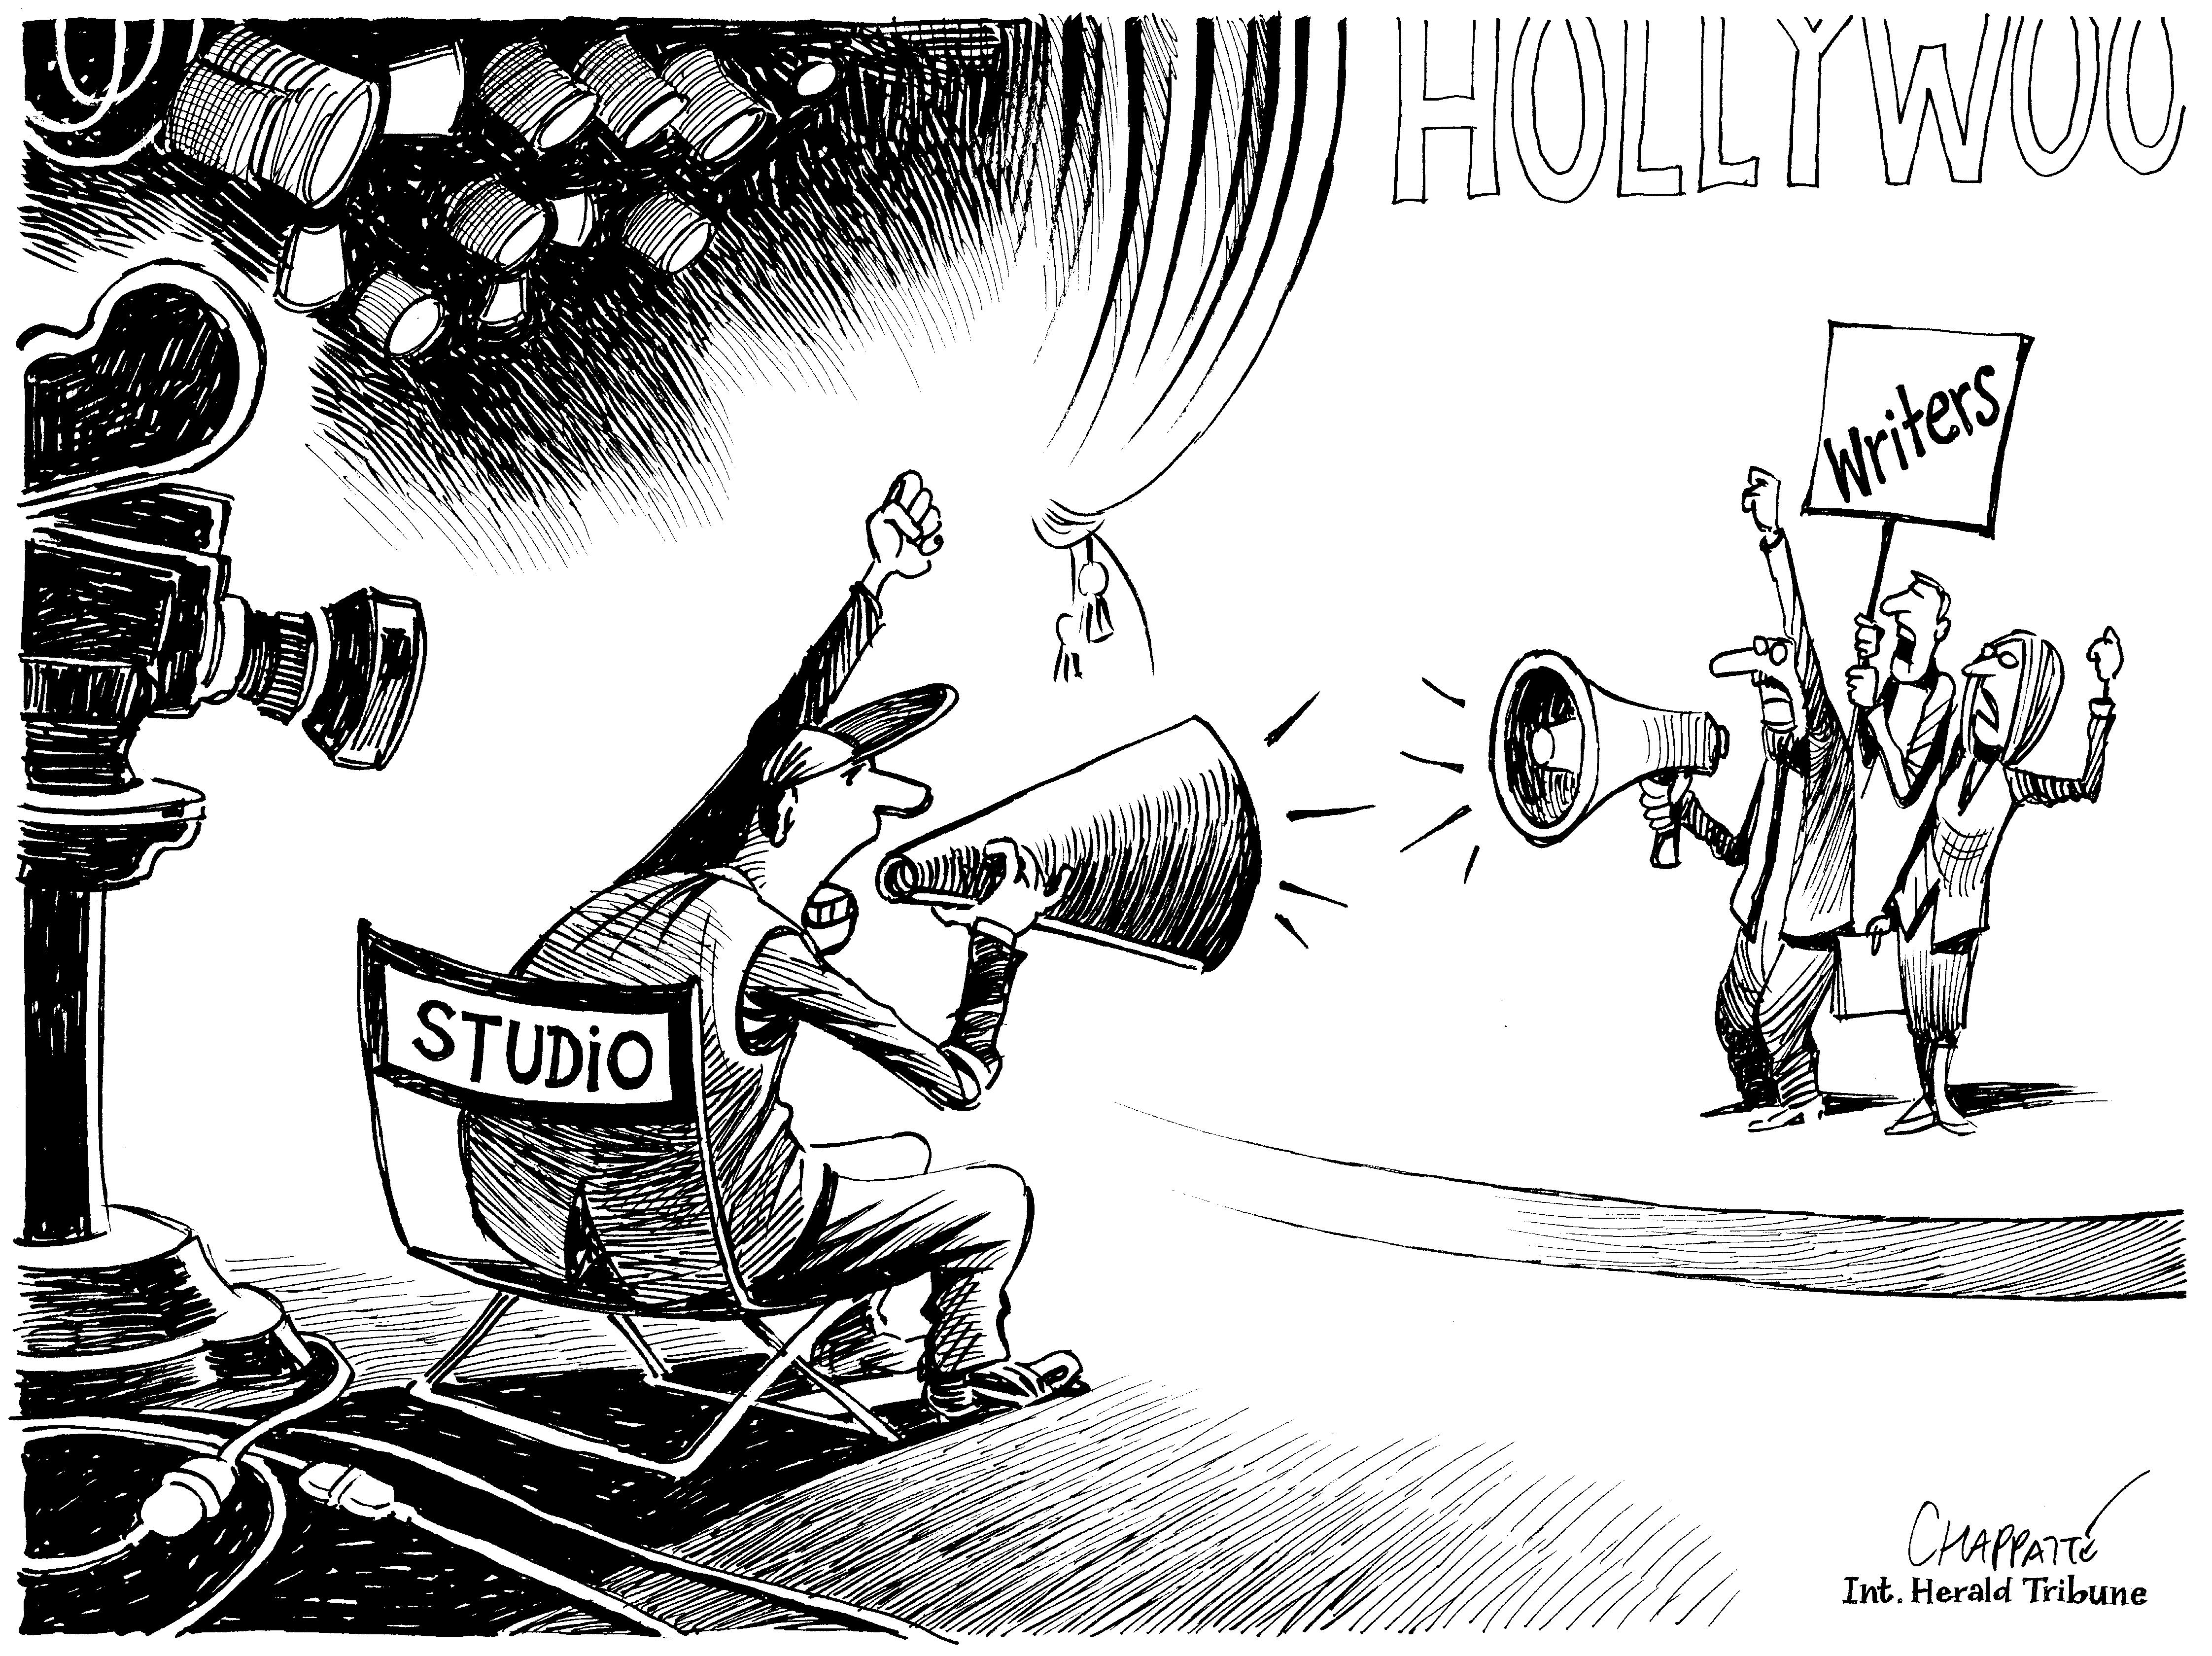 The strike in Hollywood goes on